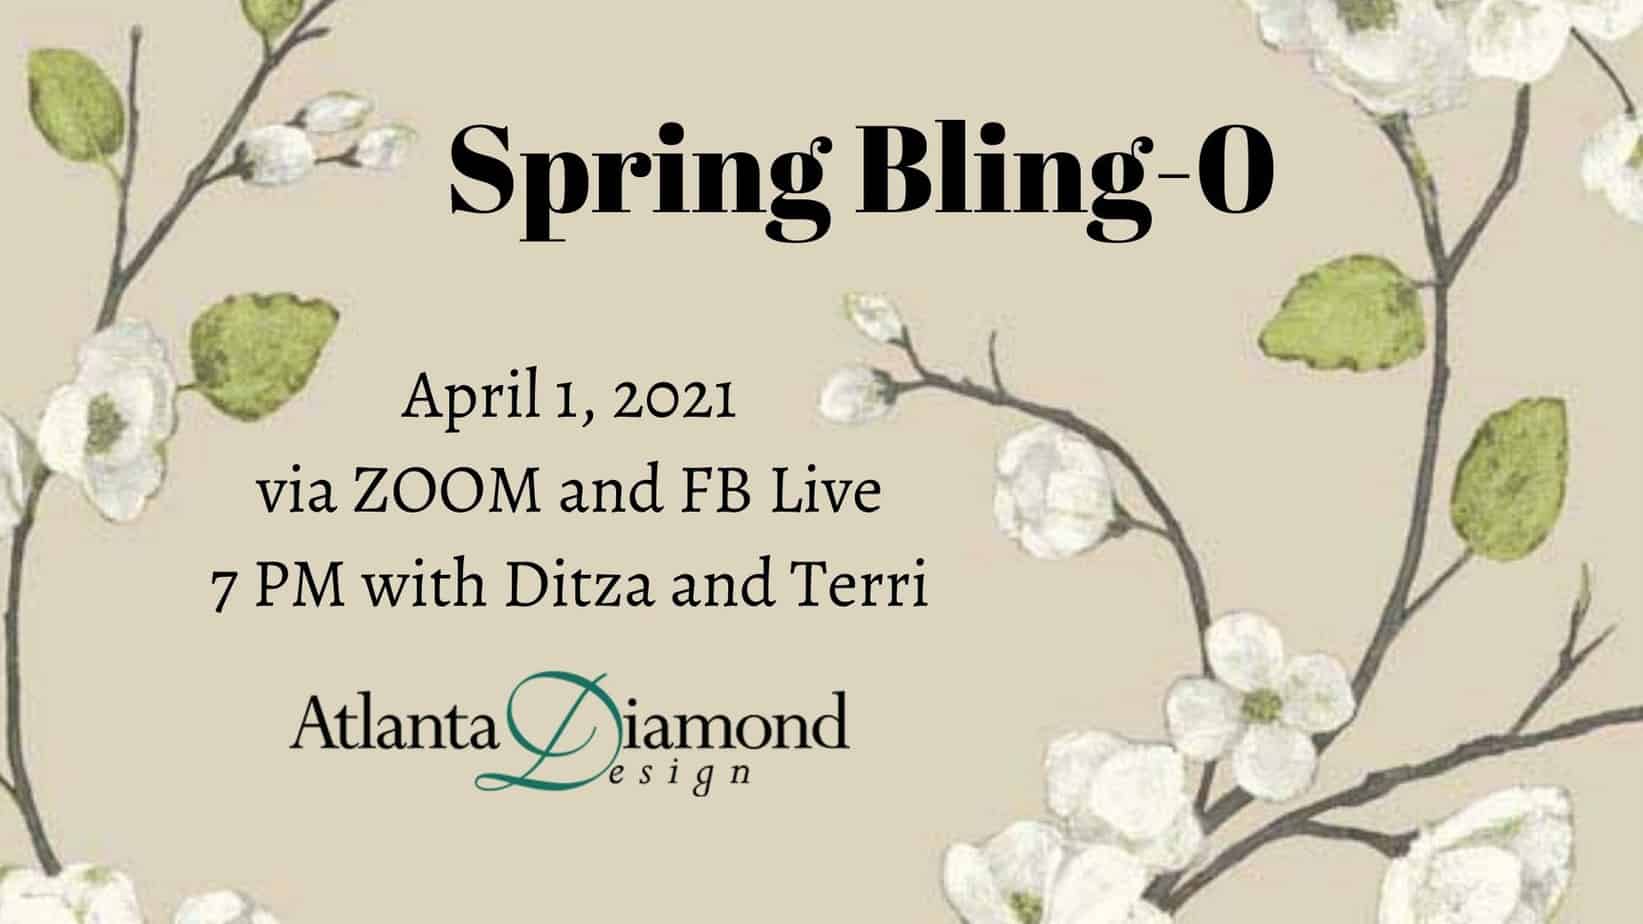 Spring Bling-O Jewelry Trivia Game